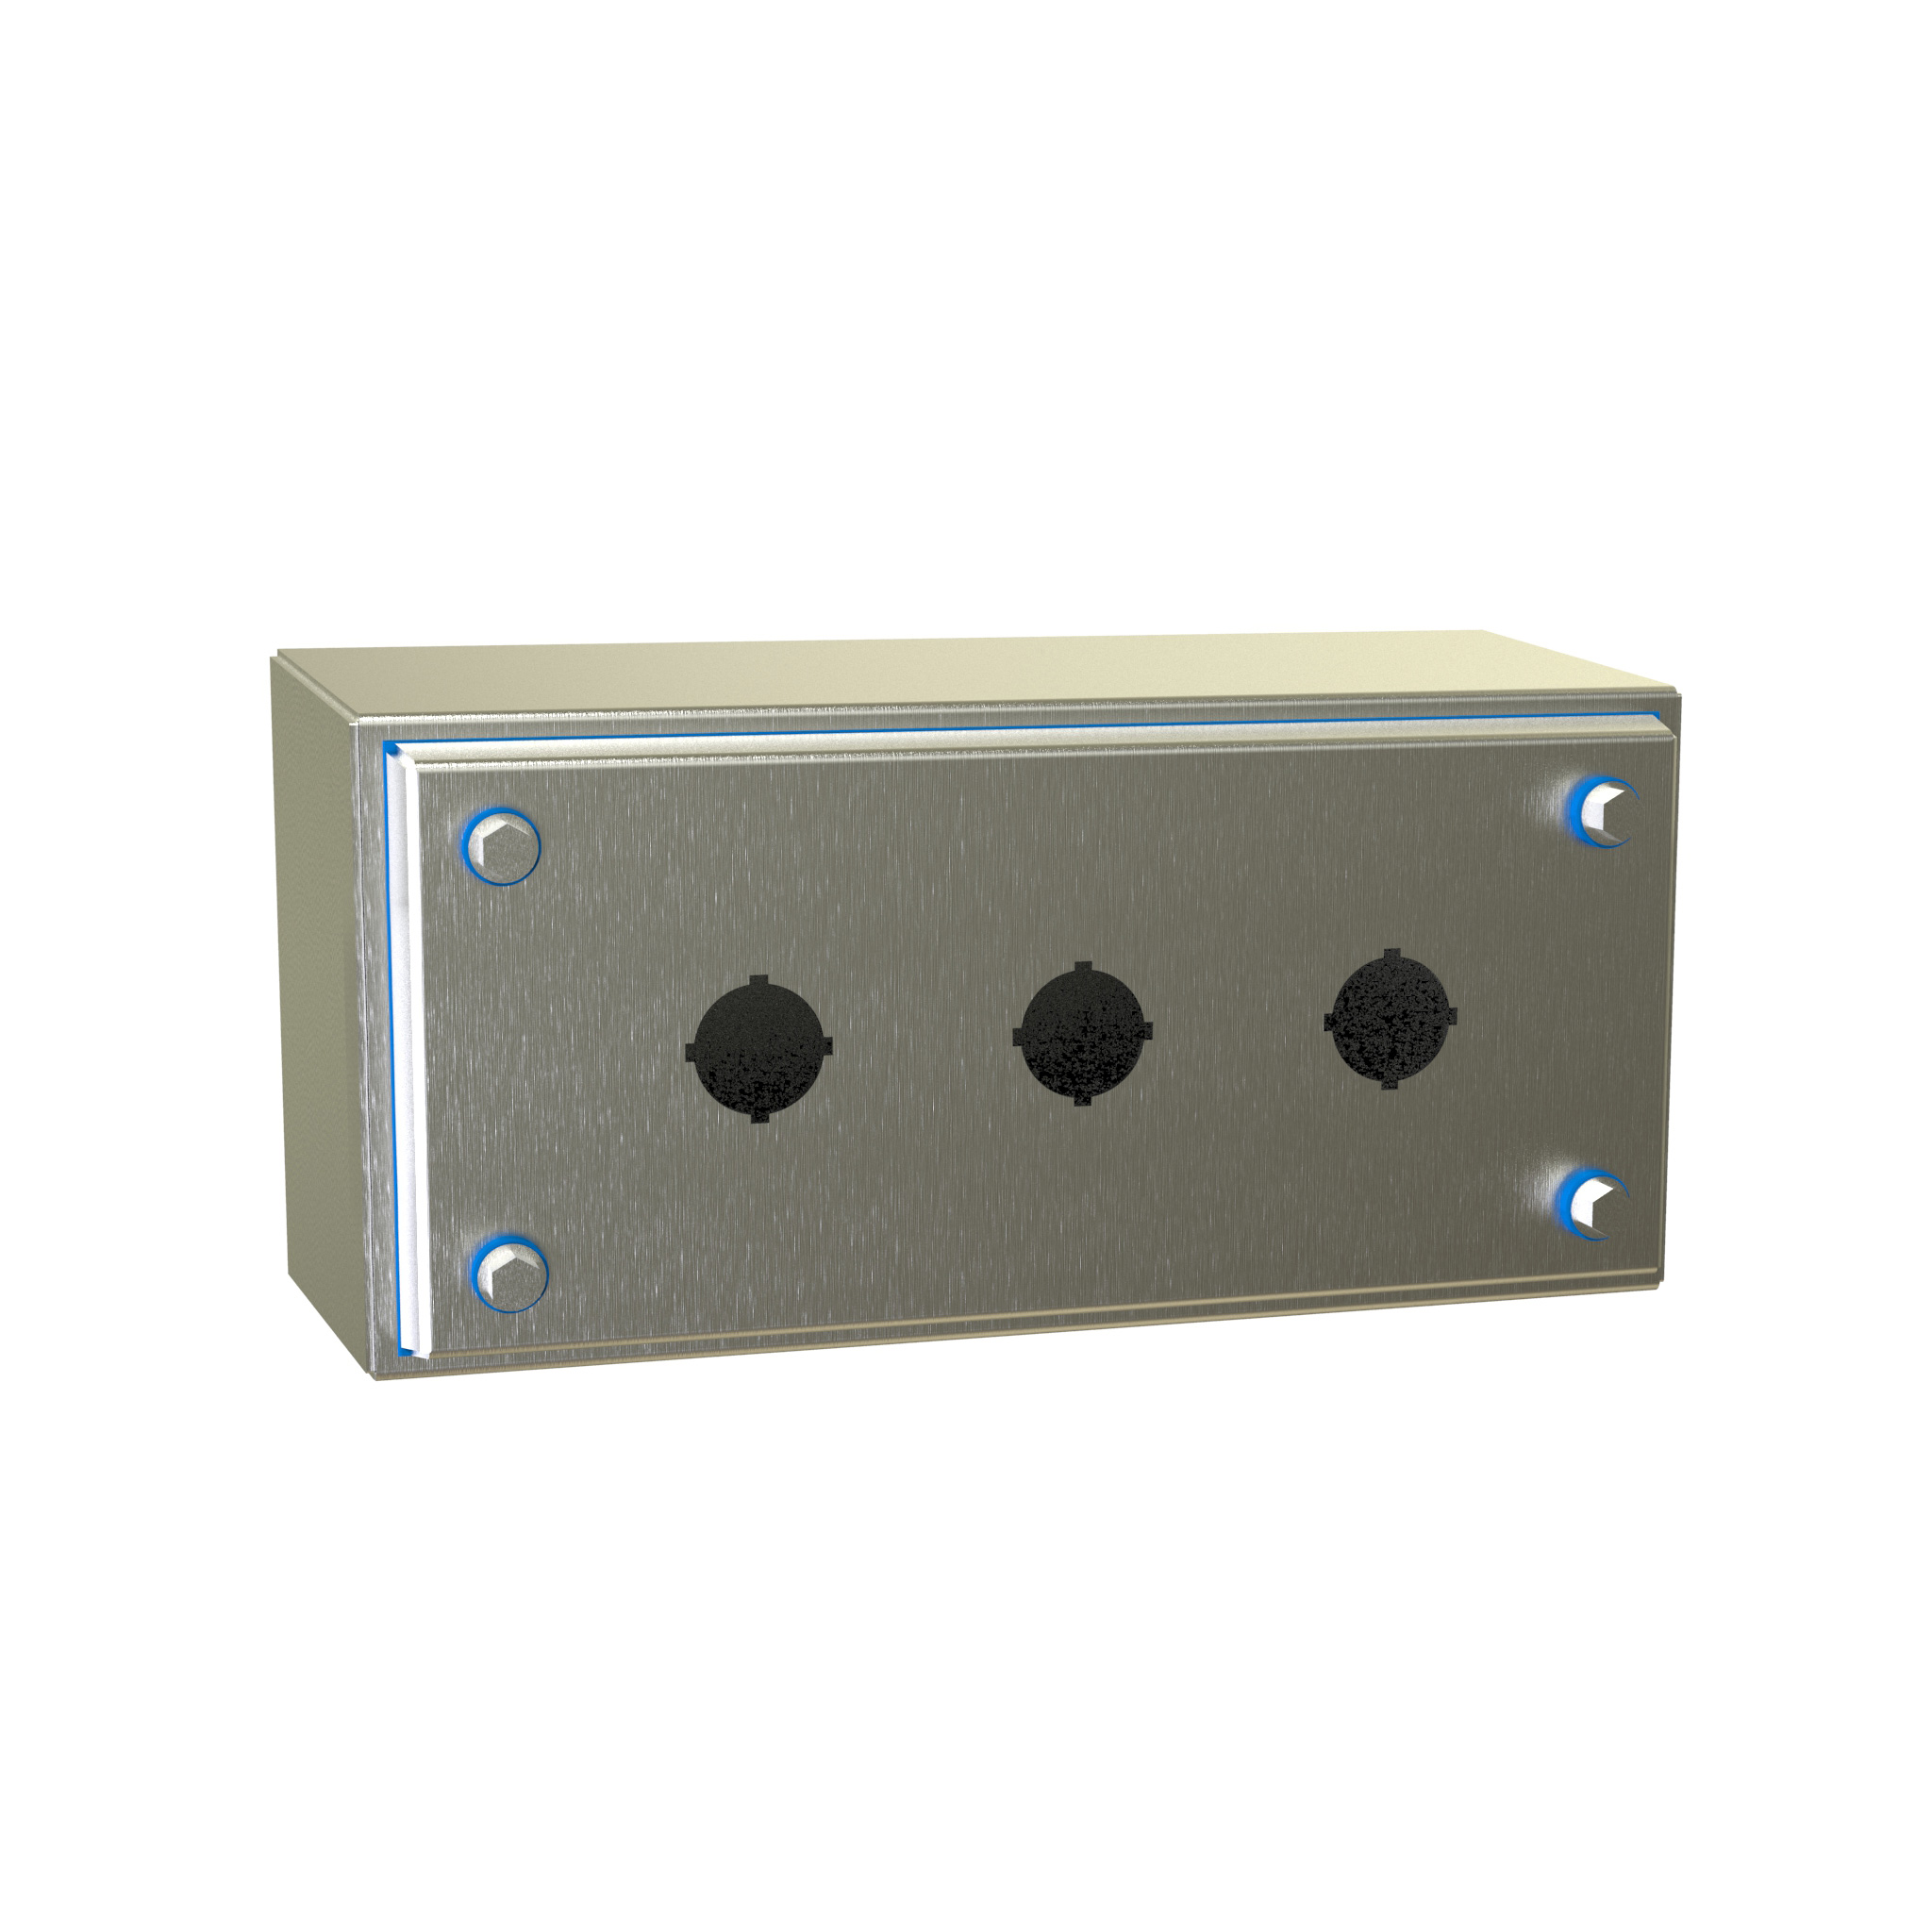 Hygienic Type 4X Stainless Steel Pushbutton Enclosure HYPB Series